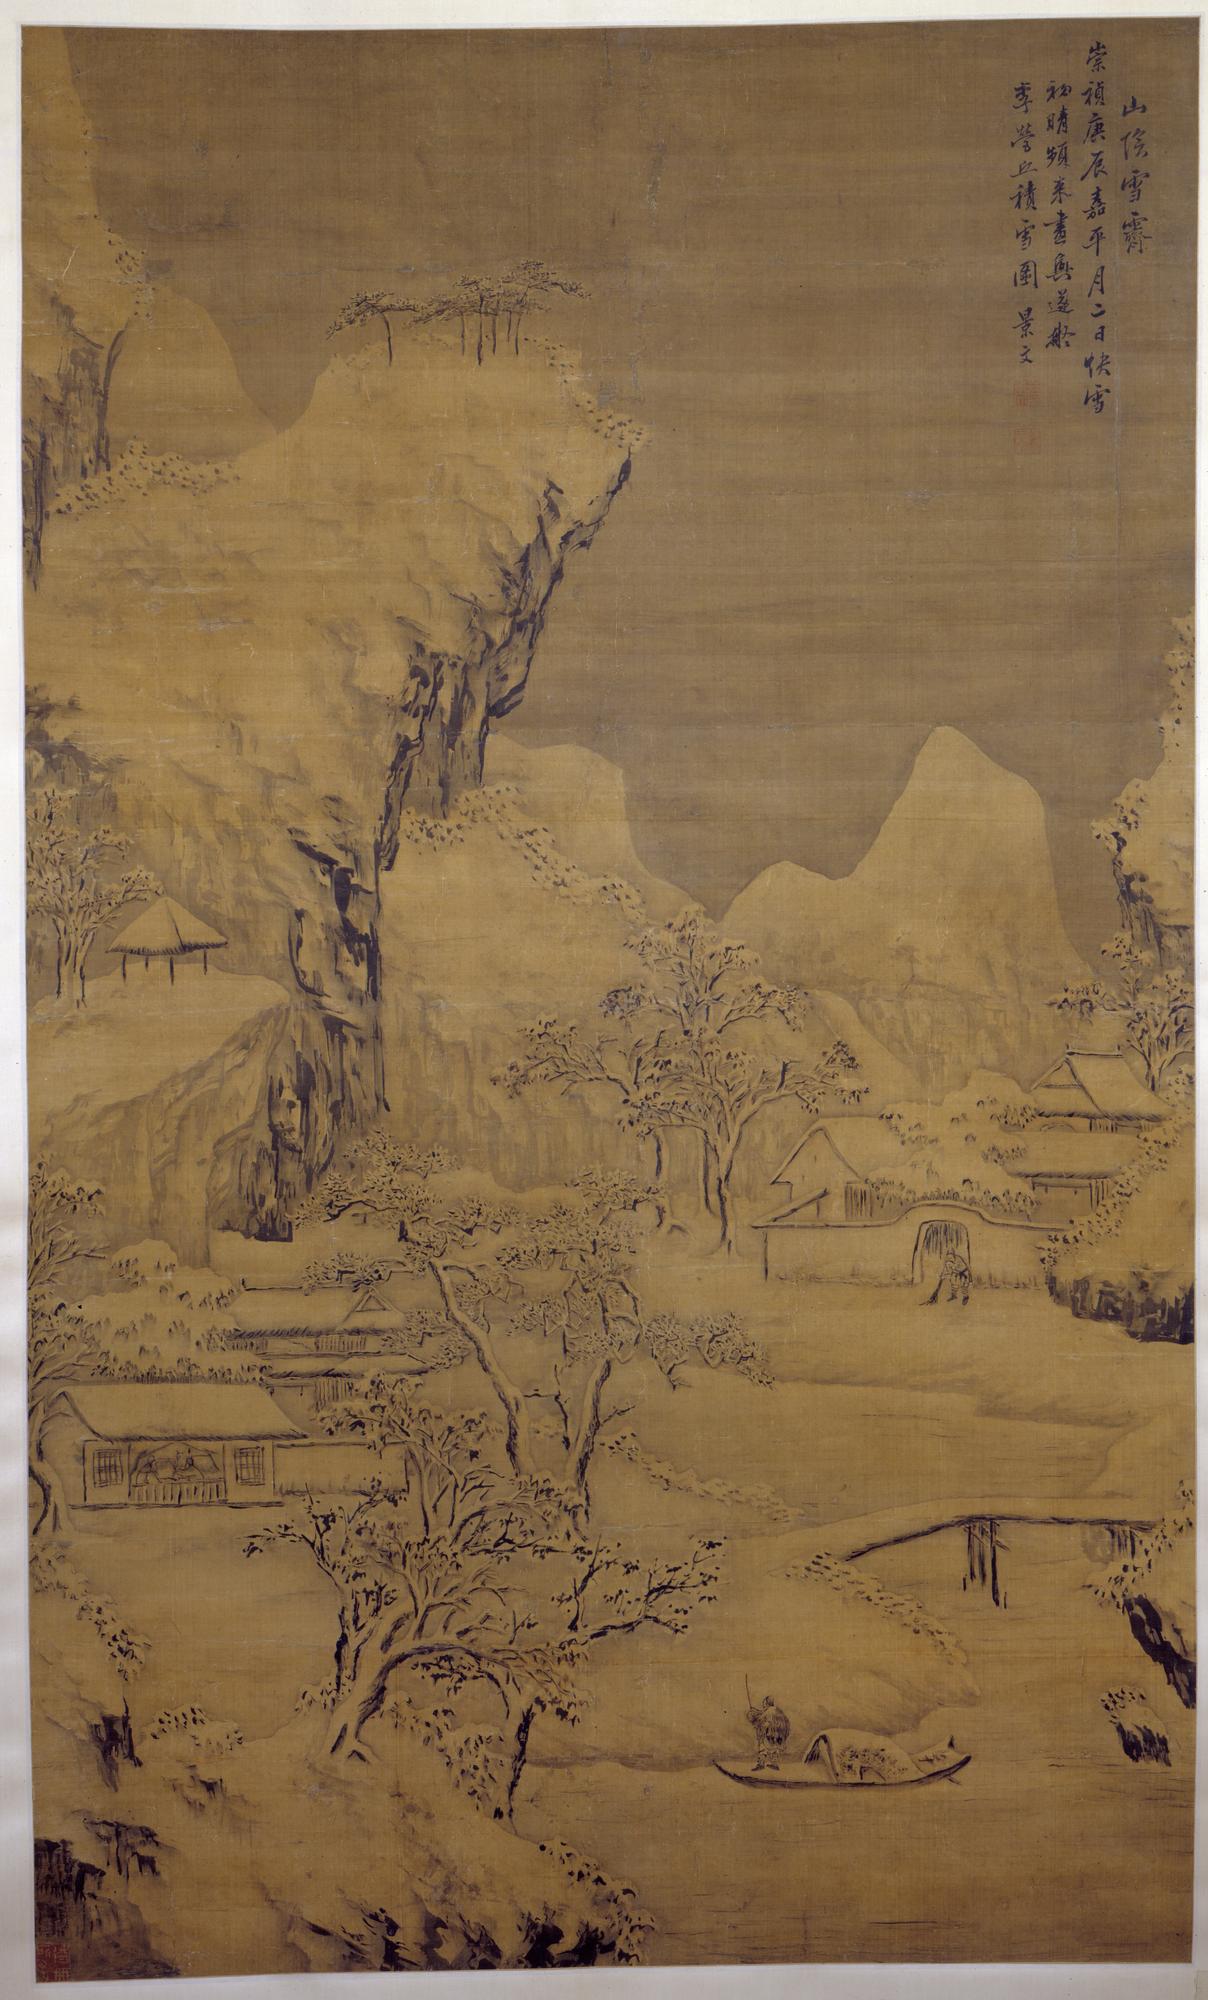 Hanging scroll painting, entitled Piles of Snow Sheltered by the Mountain, depicting buildings around a river with a fisherman poling a boat, beneath snow-covered mountains, in ink and colours on silk: China, Ming Dynasty, by Fan Jingwen, 1640.